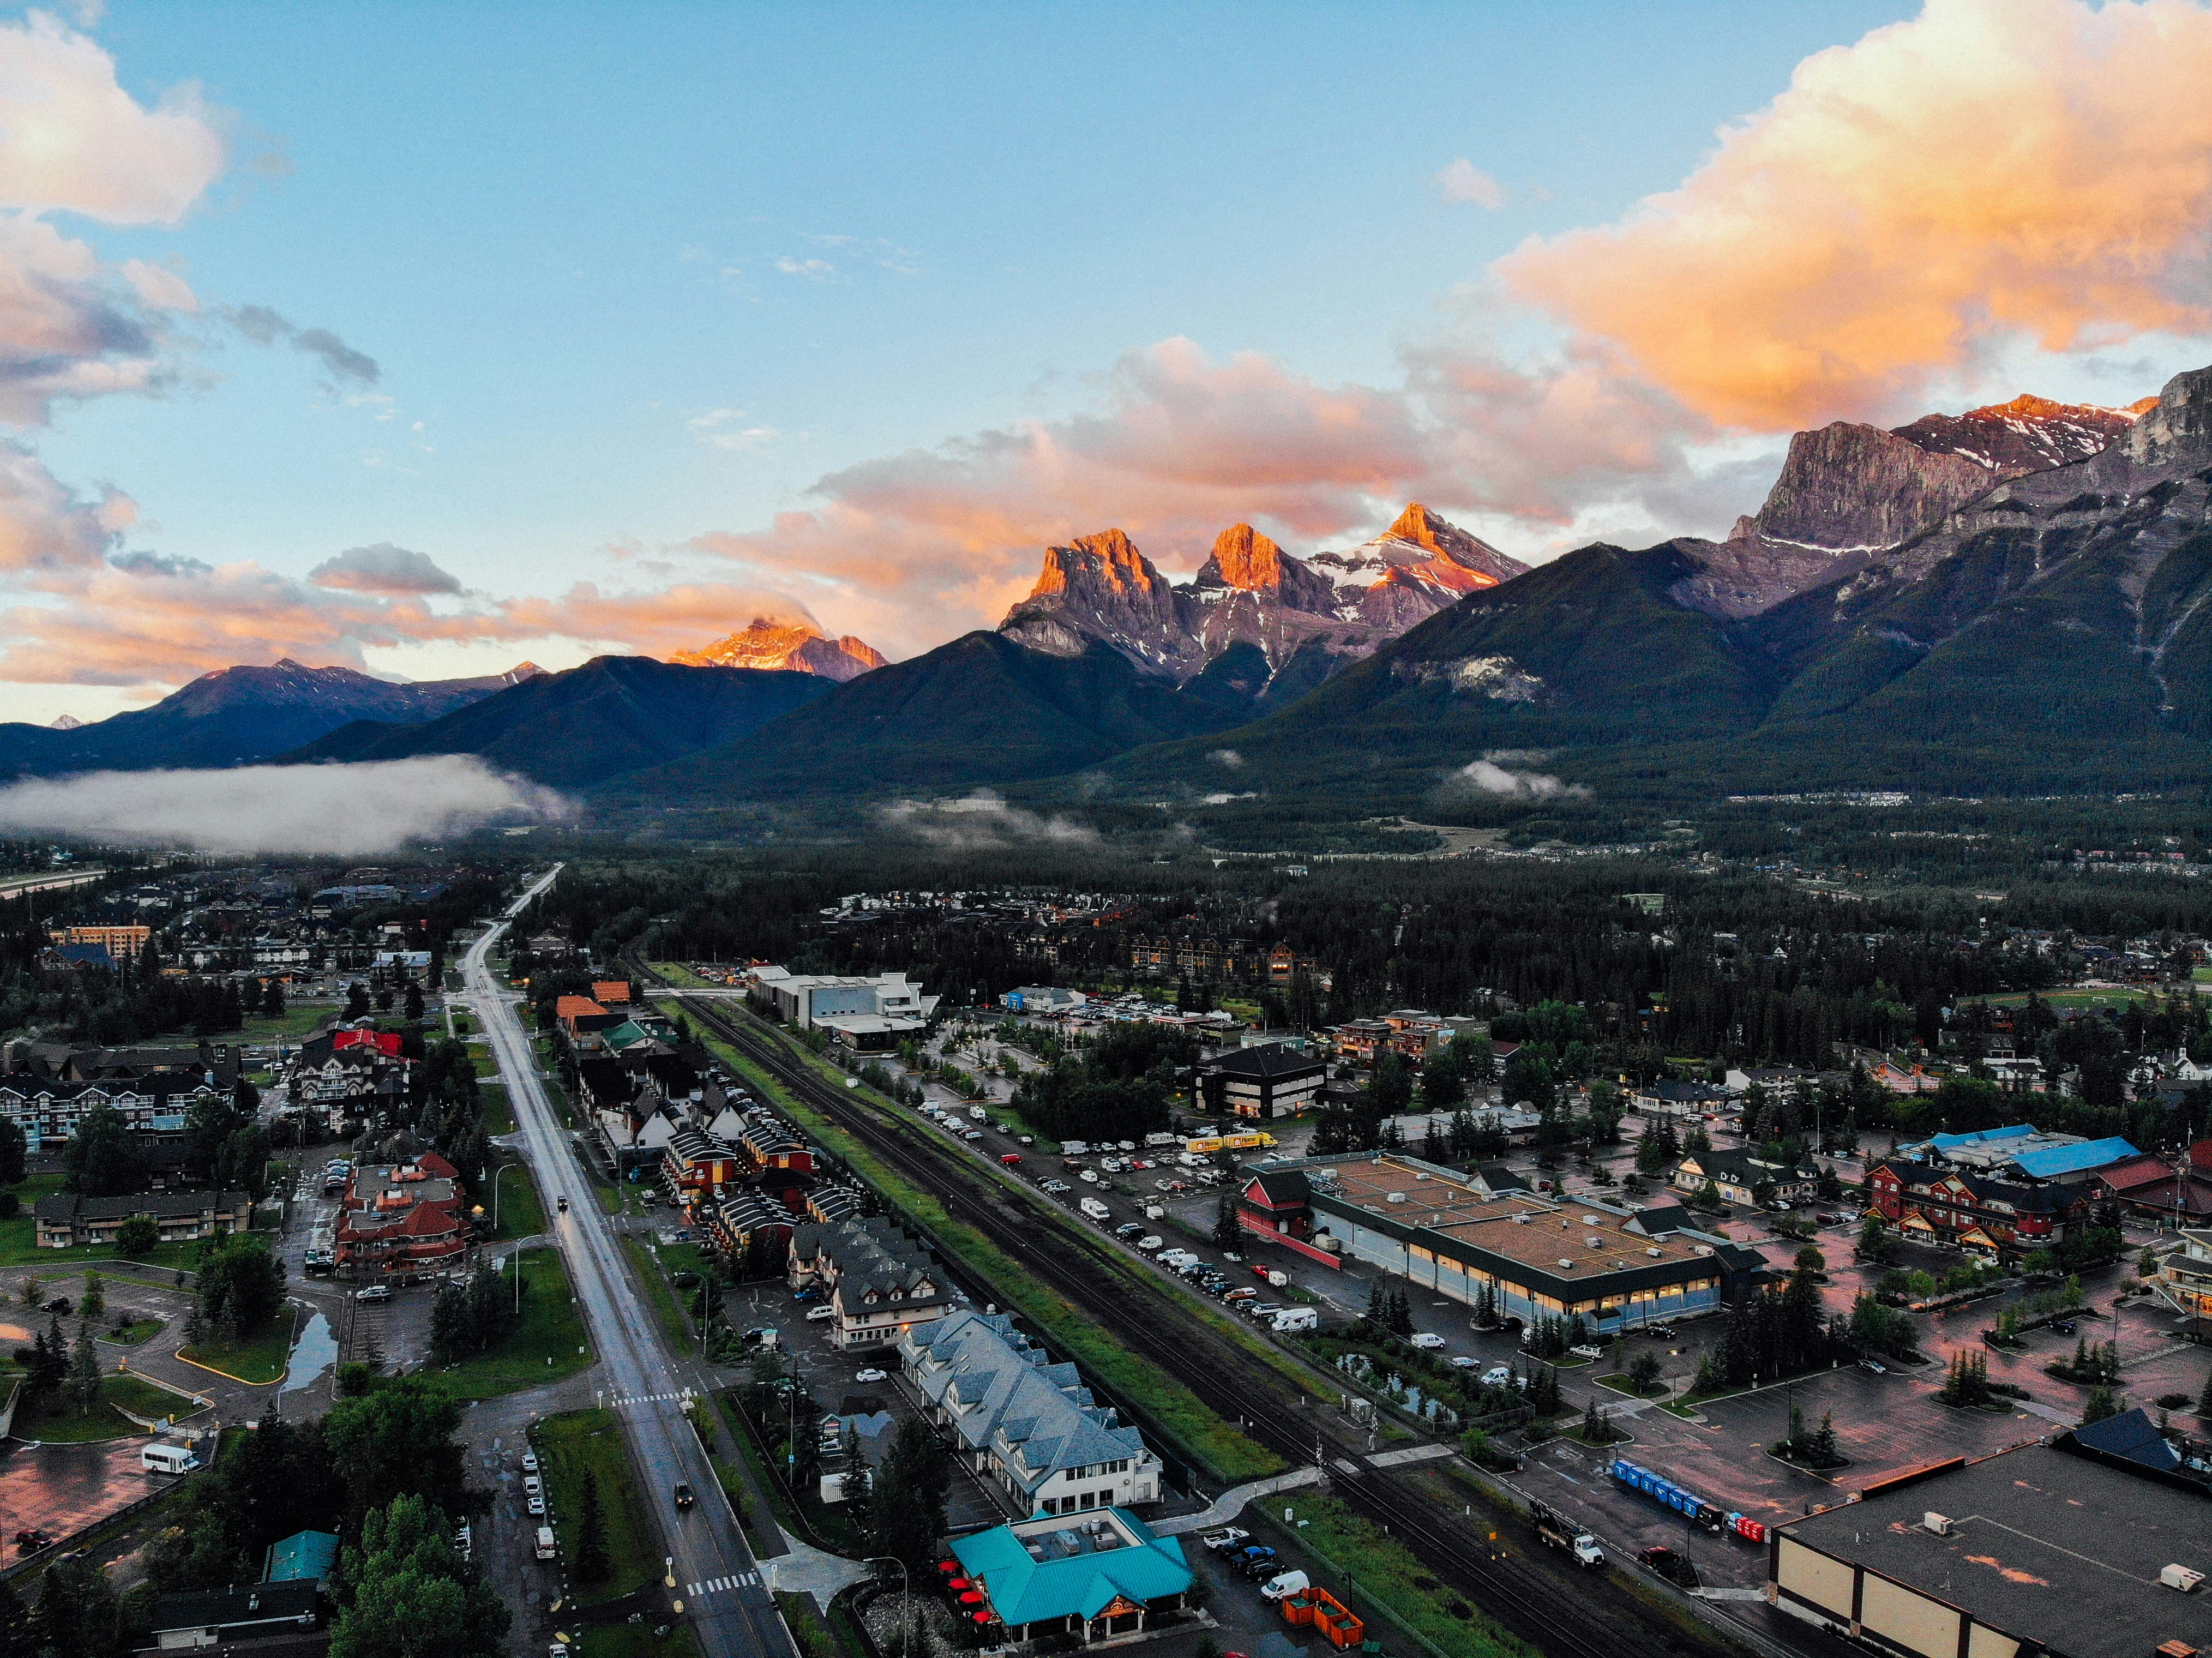 An aerial view of a town, with mountains in the background